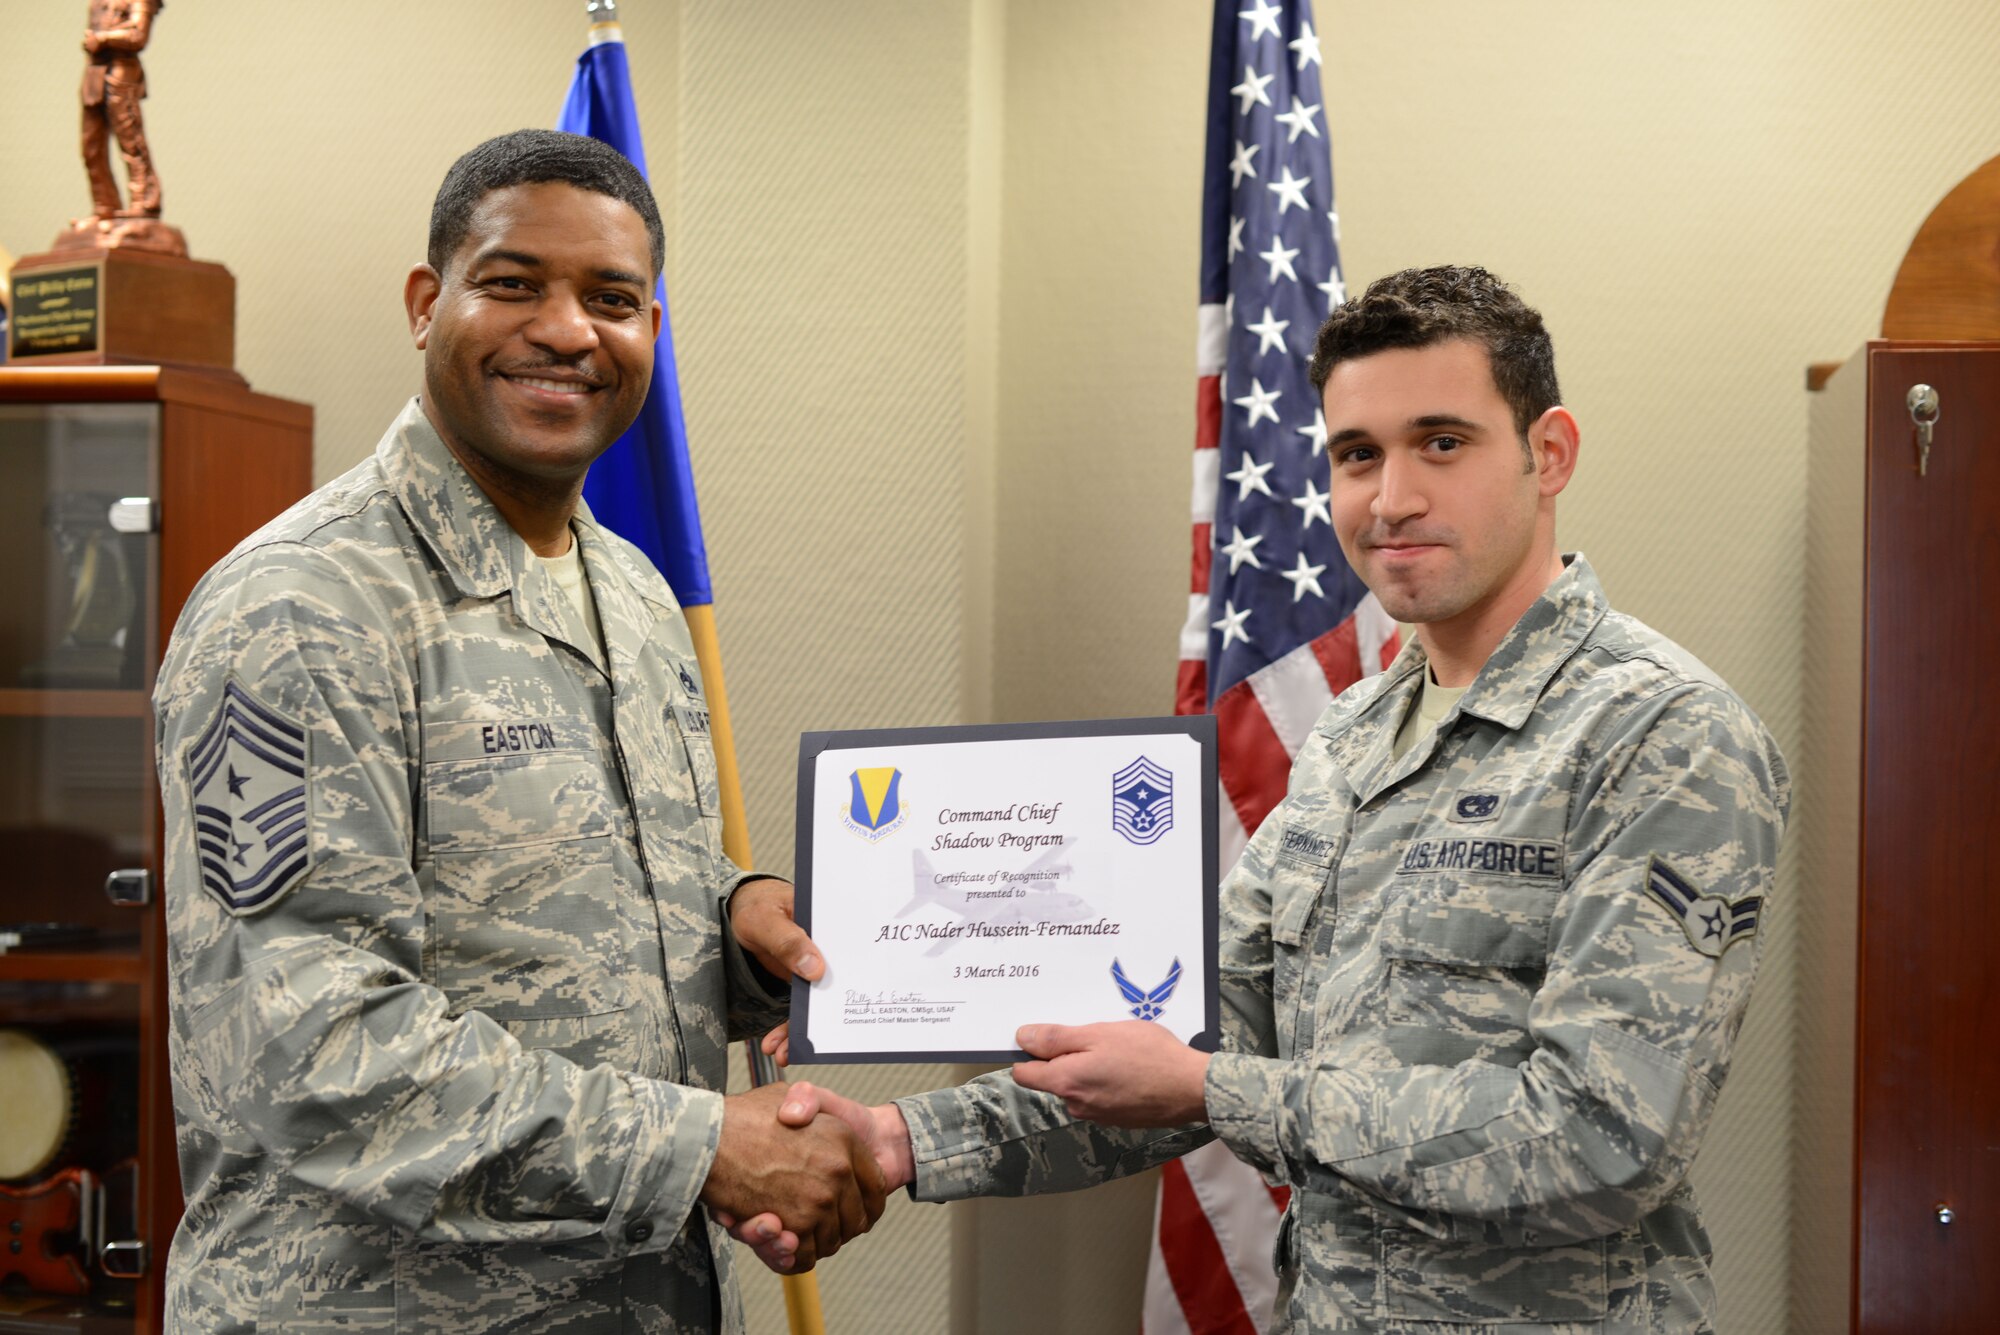 Airman First Class Nader Hussein-Fernandez, an aerospace ground equipment technician with the 86th Maintenance Squadron, receives a certificate of recognition from 86th Airlift Wing Command Chief Philip L. Easton, March 3, at Ramstein Air Base, Germany. Hussein-Fernandez was the first to participate in Easton’s shadow program at Ramstein, allowing him the opportunity to witness life as a wing command chief for a duty day. (U.S. Air Force photo/Tech. Sgt. Micky M. Pena)